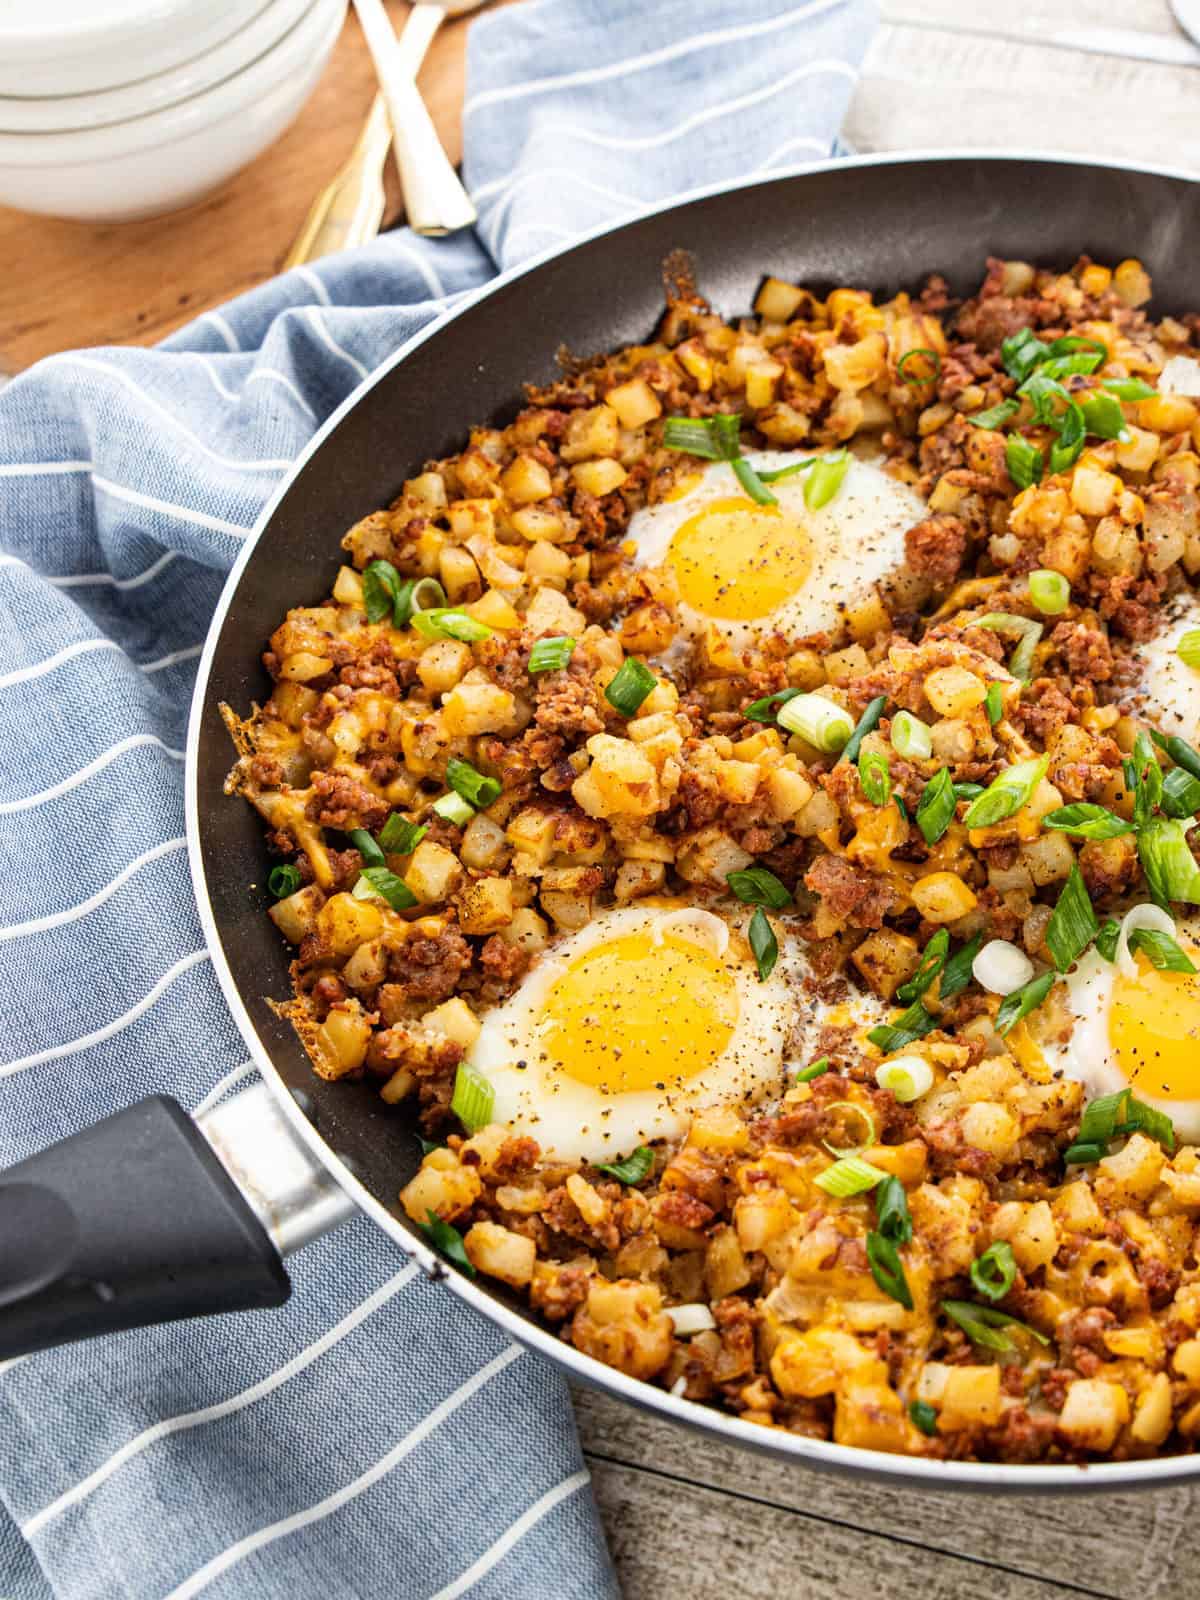 A sausage cowboy skillet is shown with 4 fried eggs, diced potatoes, and green onion garnish next to a blue stripped napkin. 